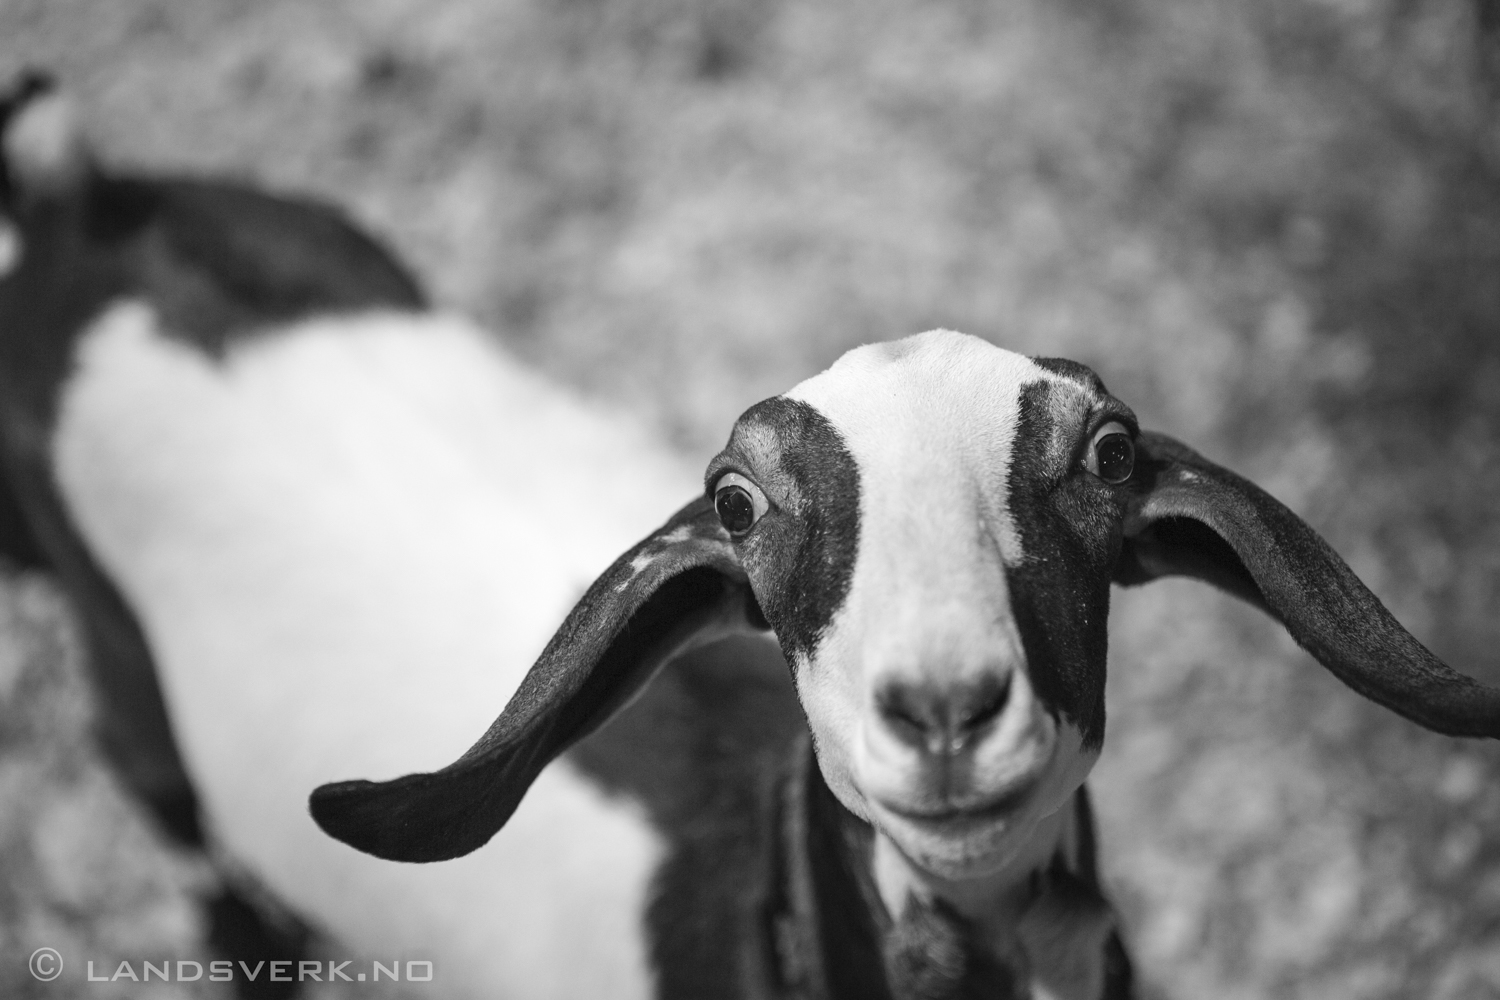 I ain't afraid of no goats. Fort Worth Stock Show & Rodeo, Texas. 

(Canon EOS 5D Mark III / Canon EF 24-70mm f/2.8 L USM